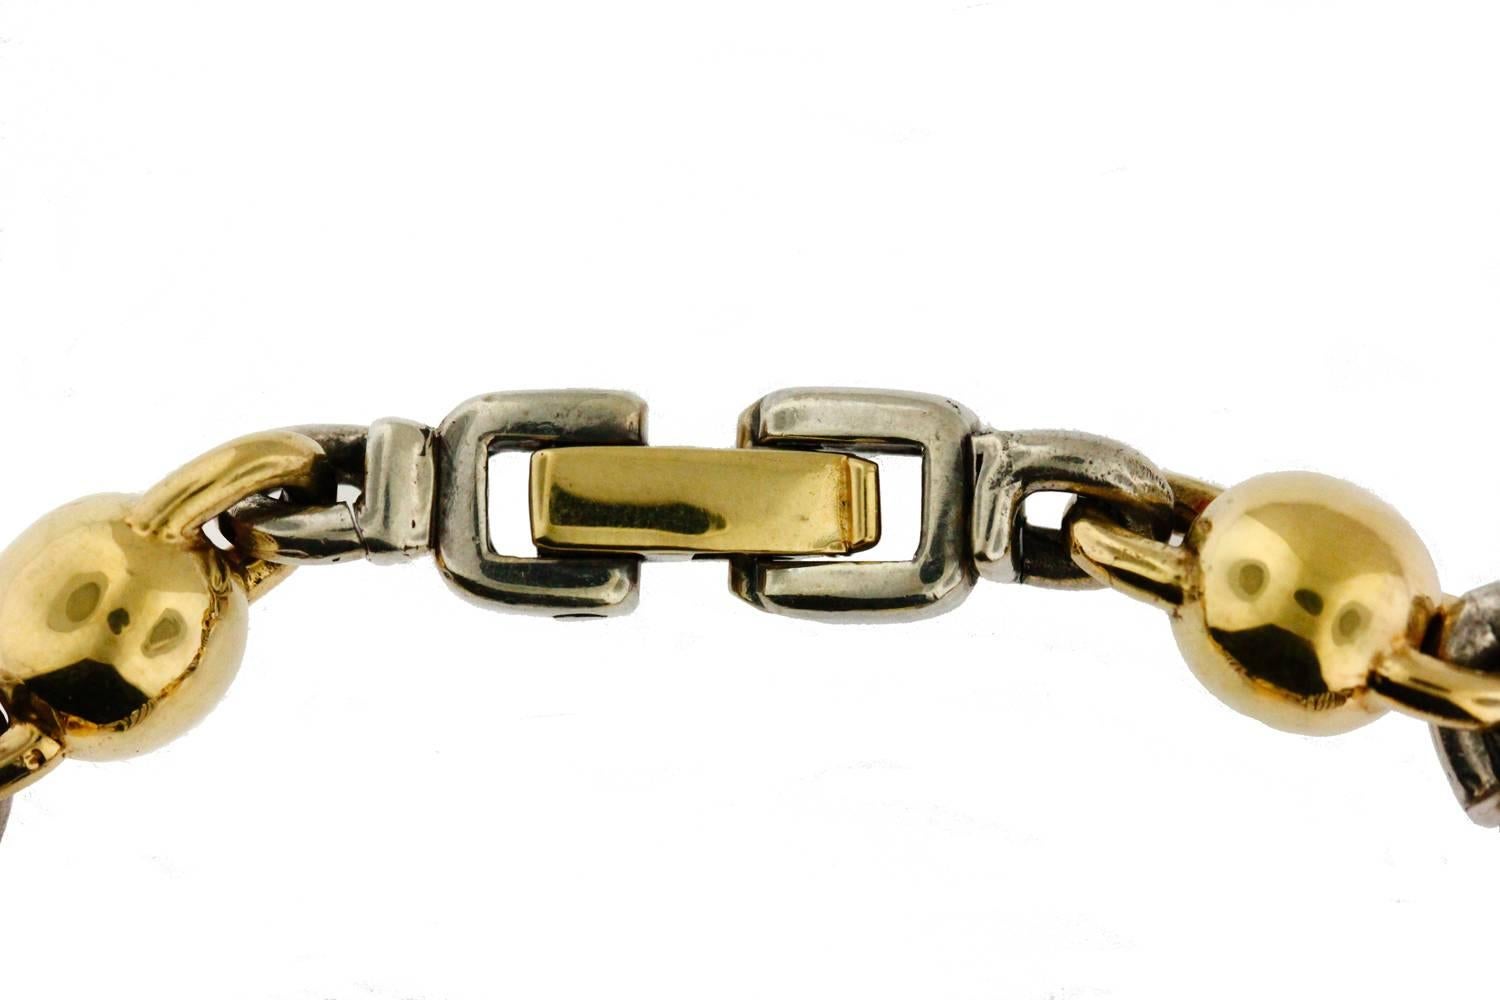 This hand made 18KT gold and silver bracelet was made by the renowned Canadian jeweler Walter Schluep. He was trained in Switzerland and opened a boutique in Montreal in 1964. His work was displayed at expo 67 and he gained much acclaim during that